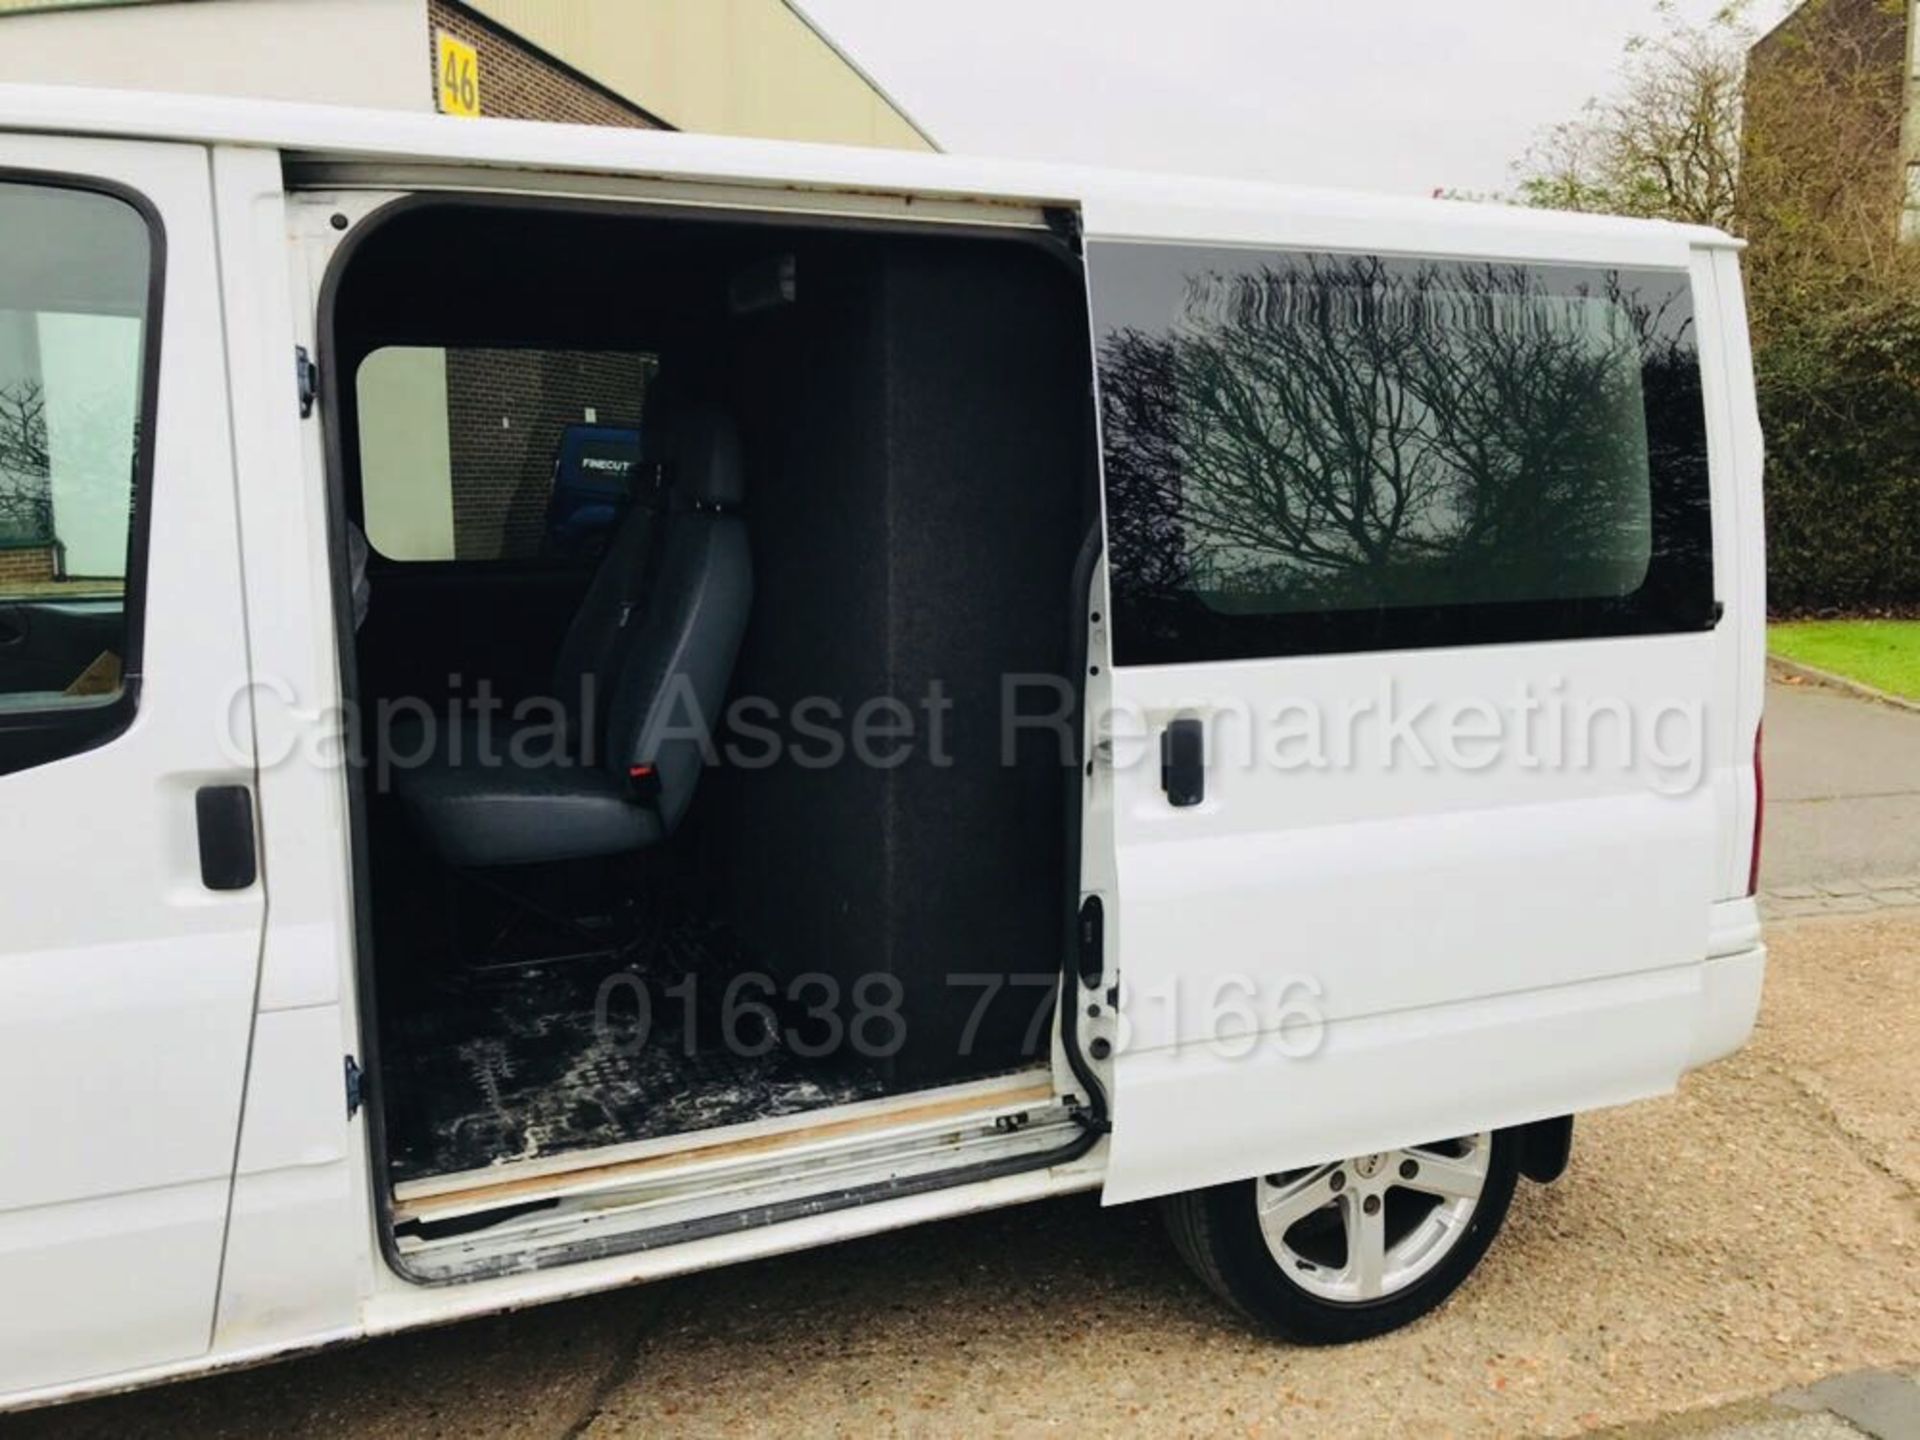 FORD TRANSIT 85 T260 SWB *SPORTY* (2010 MODEL) '2.2 TDCI - 85 PS - 5 SPEED' (NO VAT - SAVE 20%) - Image 13 of 22